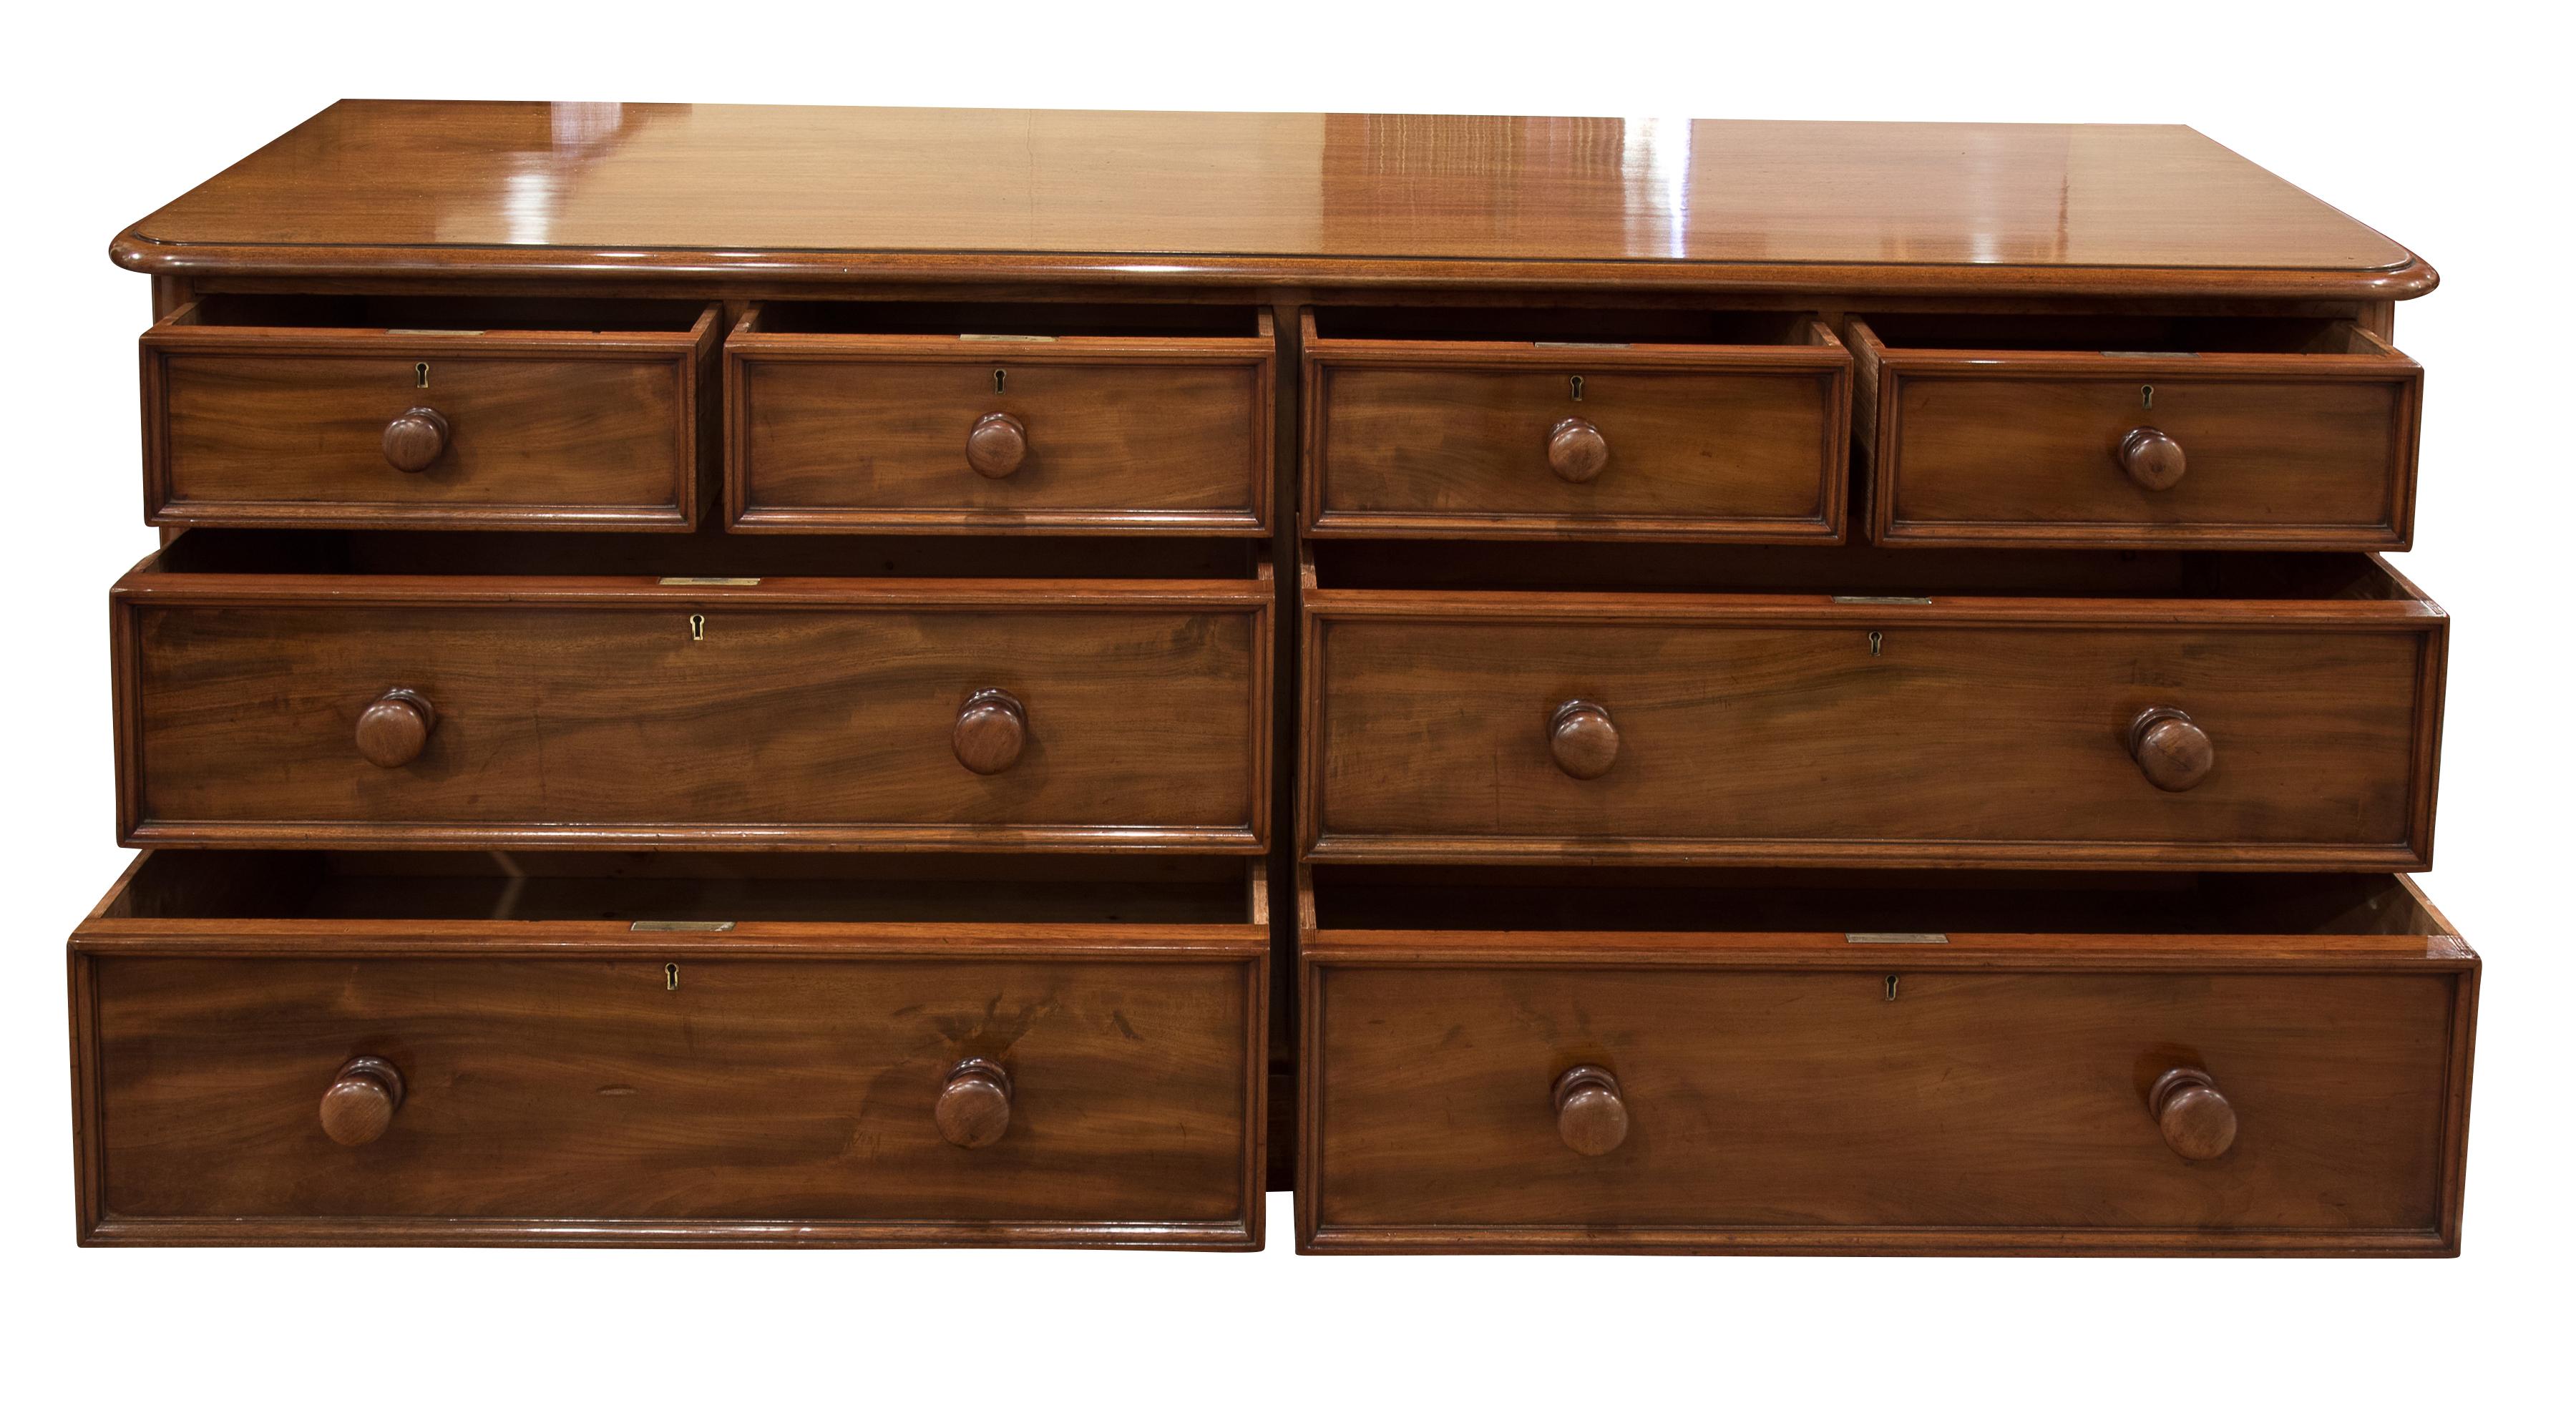 A rare 19th century double bank chest of drawers and of very good quality with cedar linings and original conditions,

 

circa 1850.